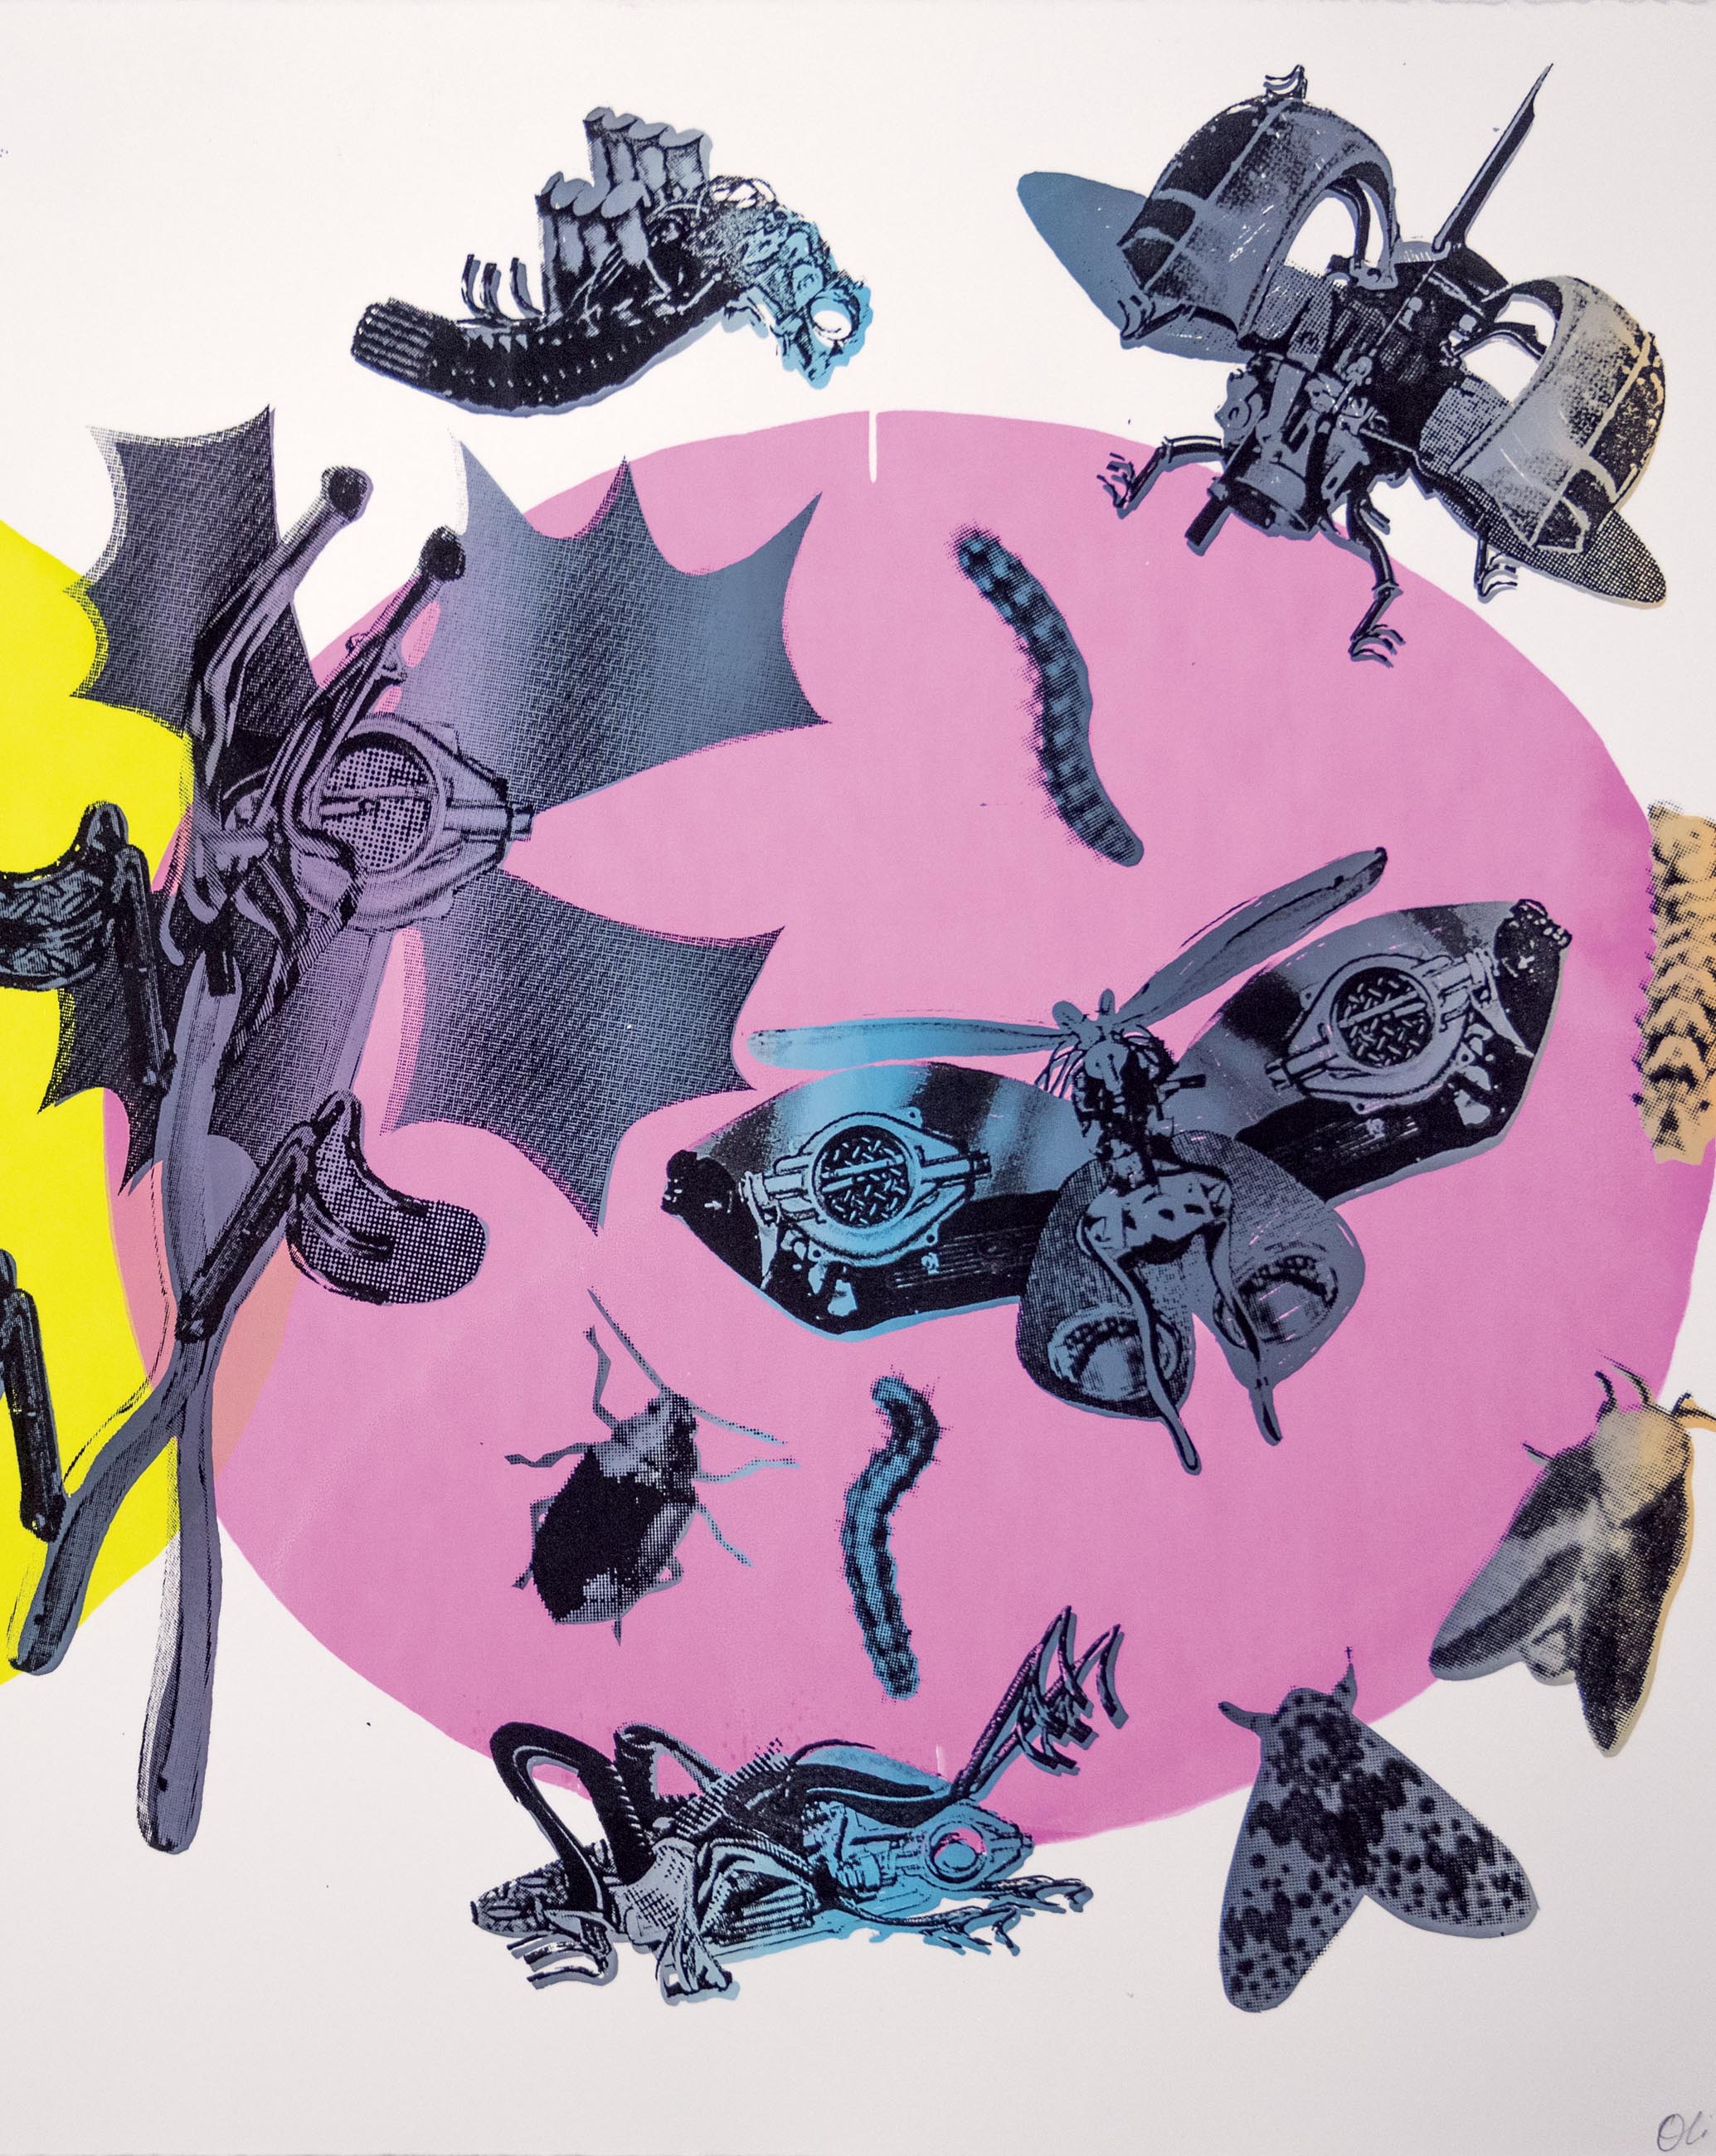 cutout prints of cyber insects layered on a large pink circle